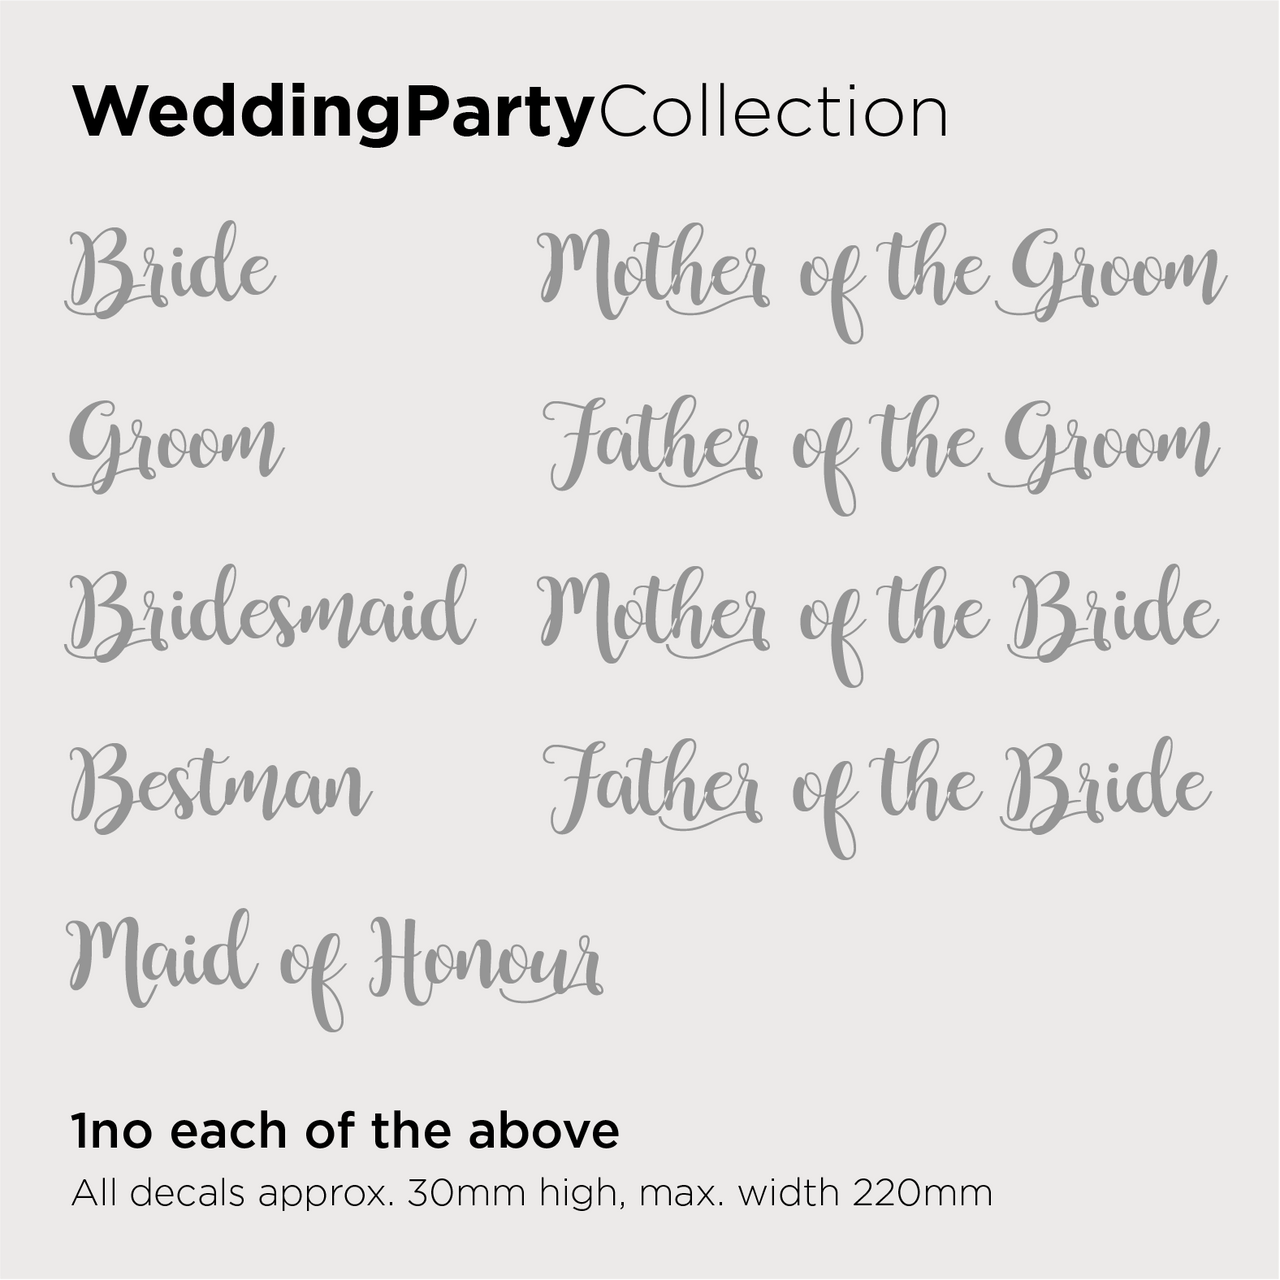 Wedding Party Collection Decals